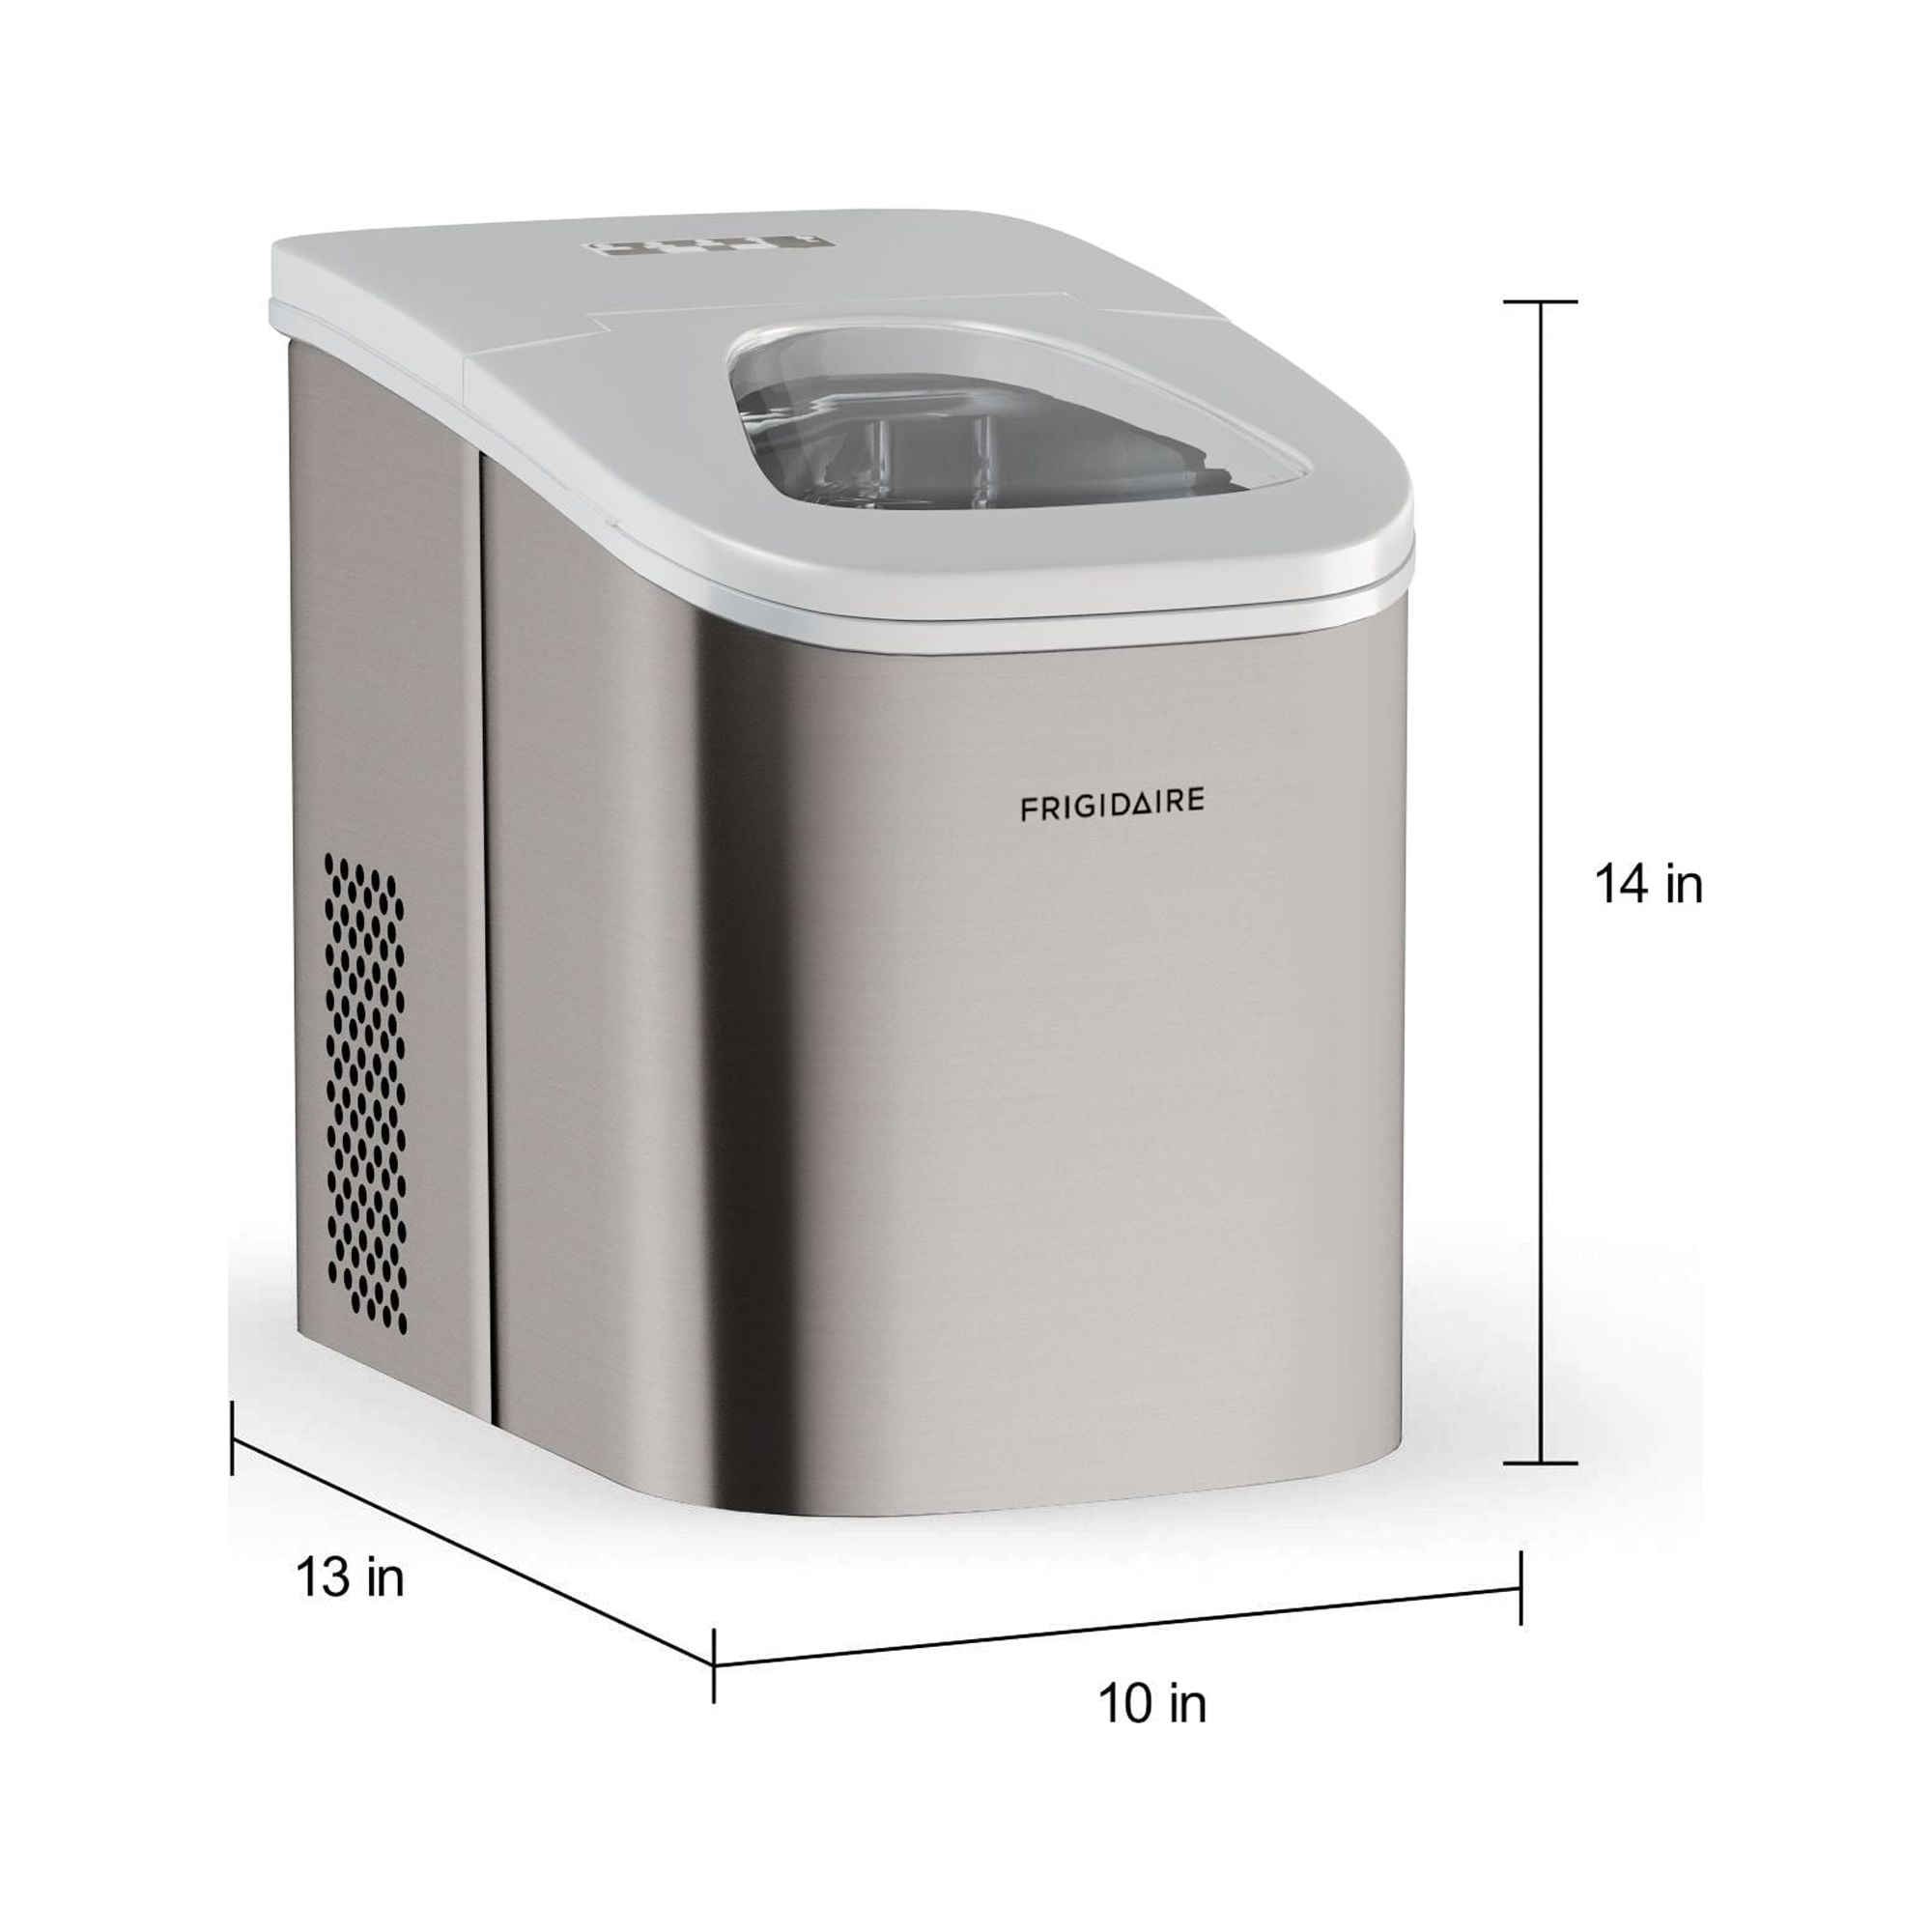 Frigidaire EFIC189-Silver Compact Ice Maker $79.99 Shipped